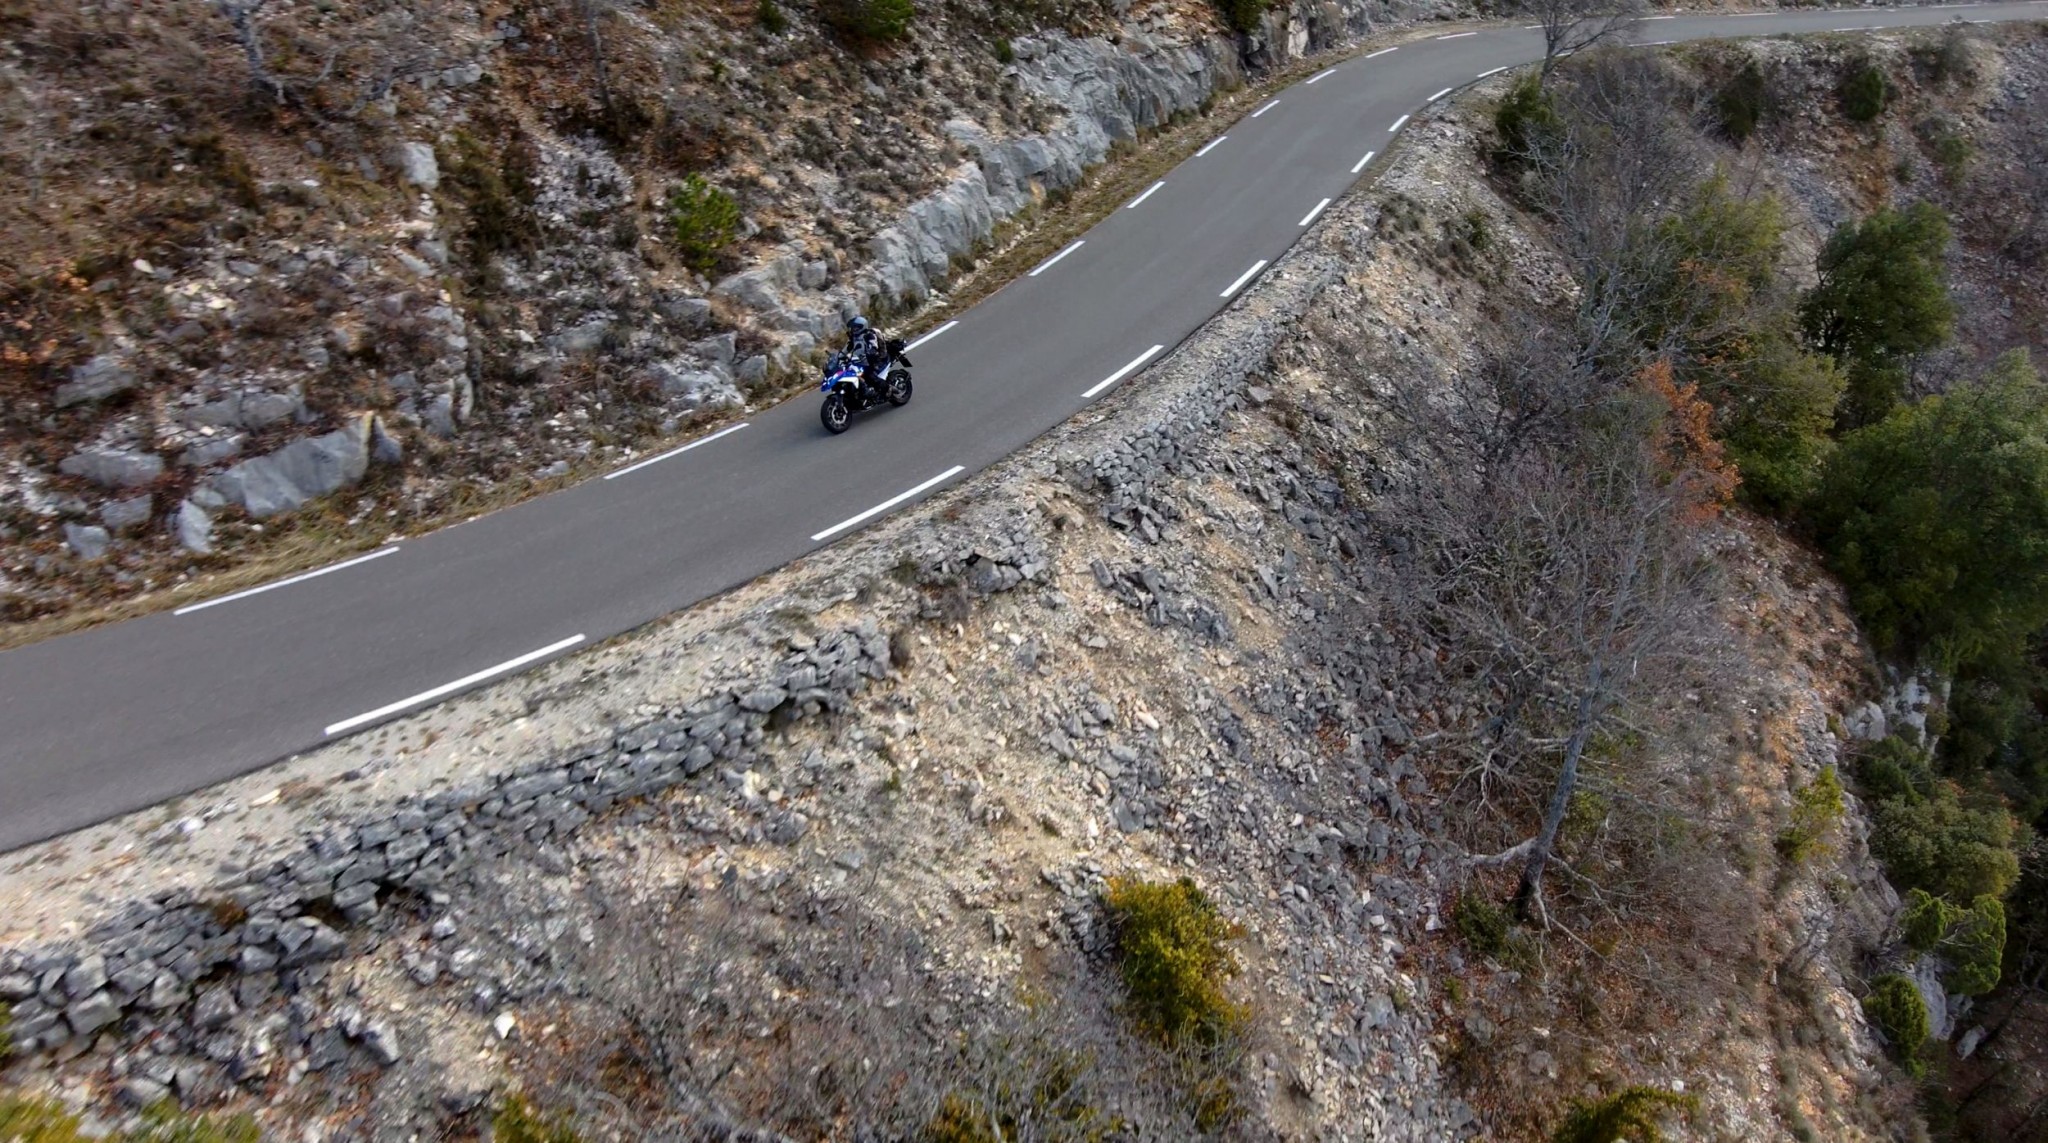 BMW R 1300 GS road test - from Barcelona to Vienna - Image 34